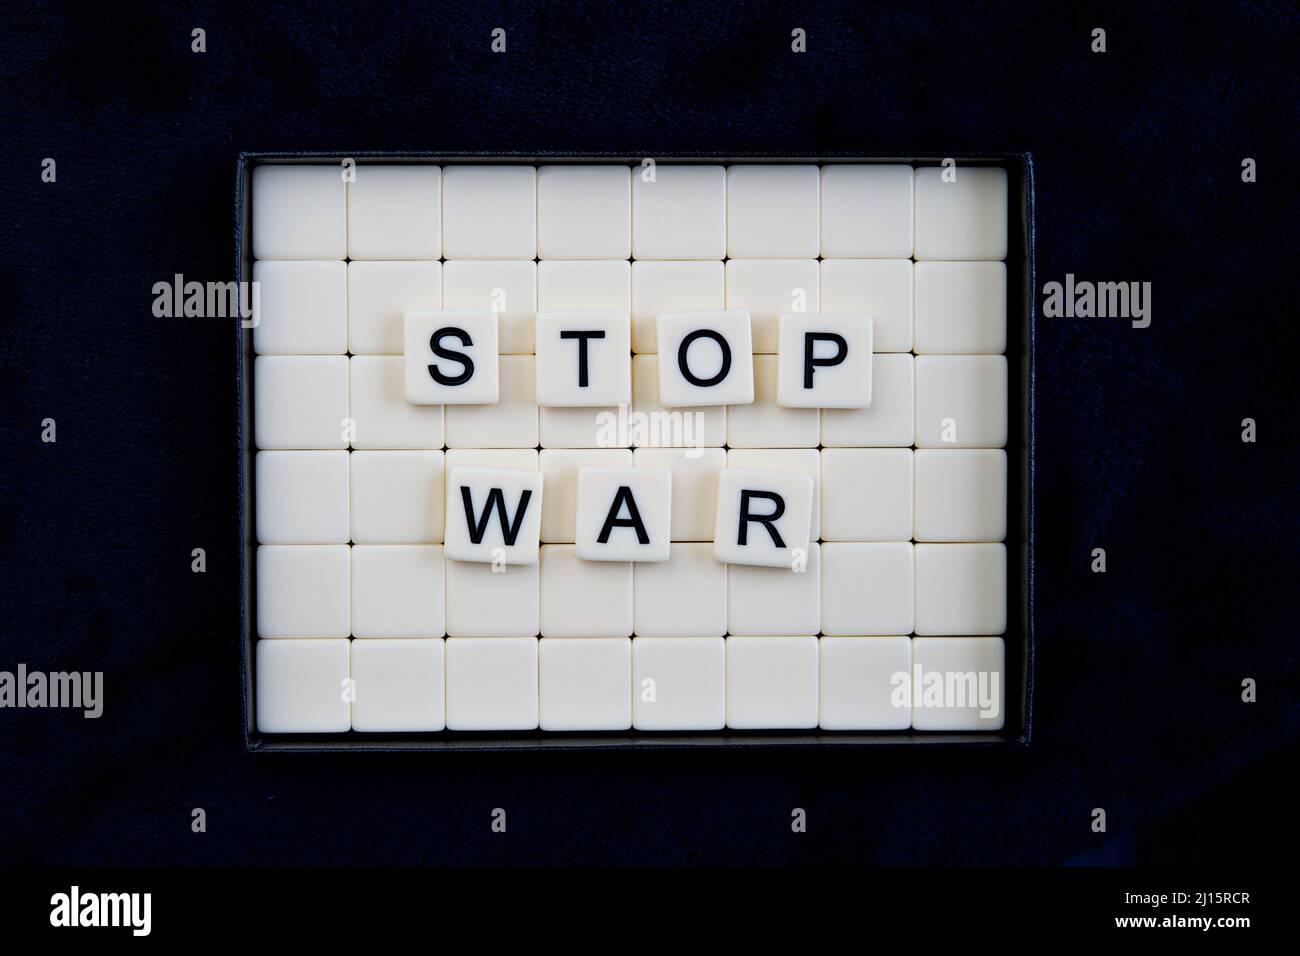 stop war:  words made up of letter combinations Stock Photo